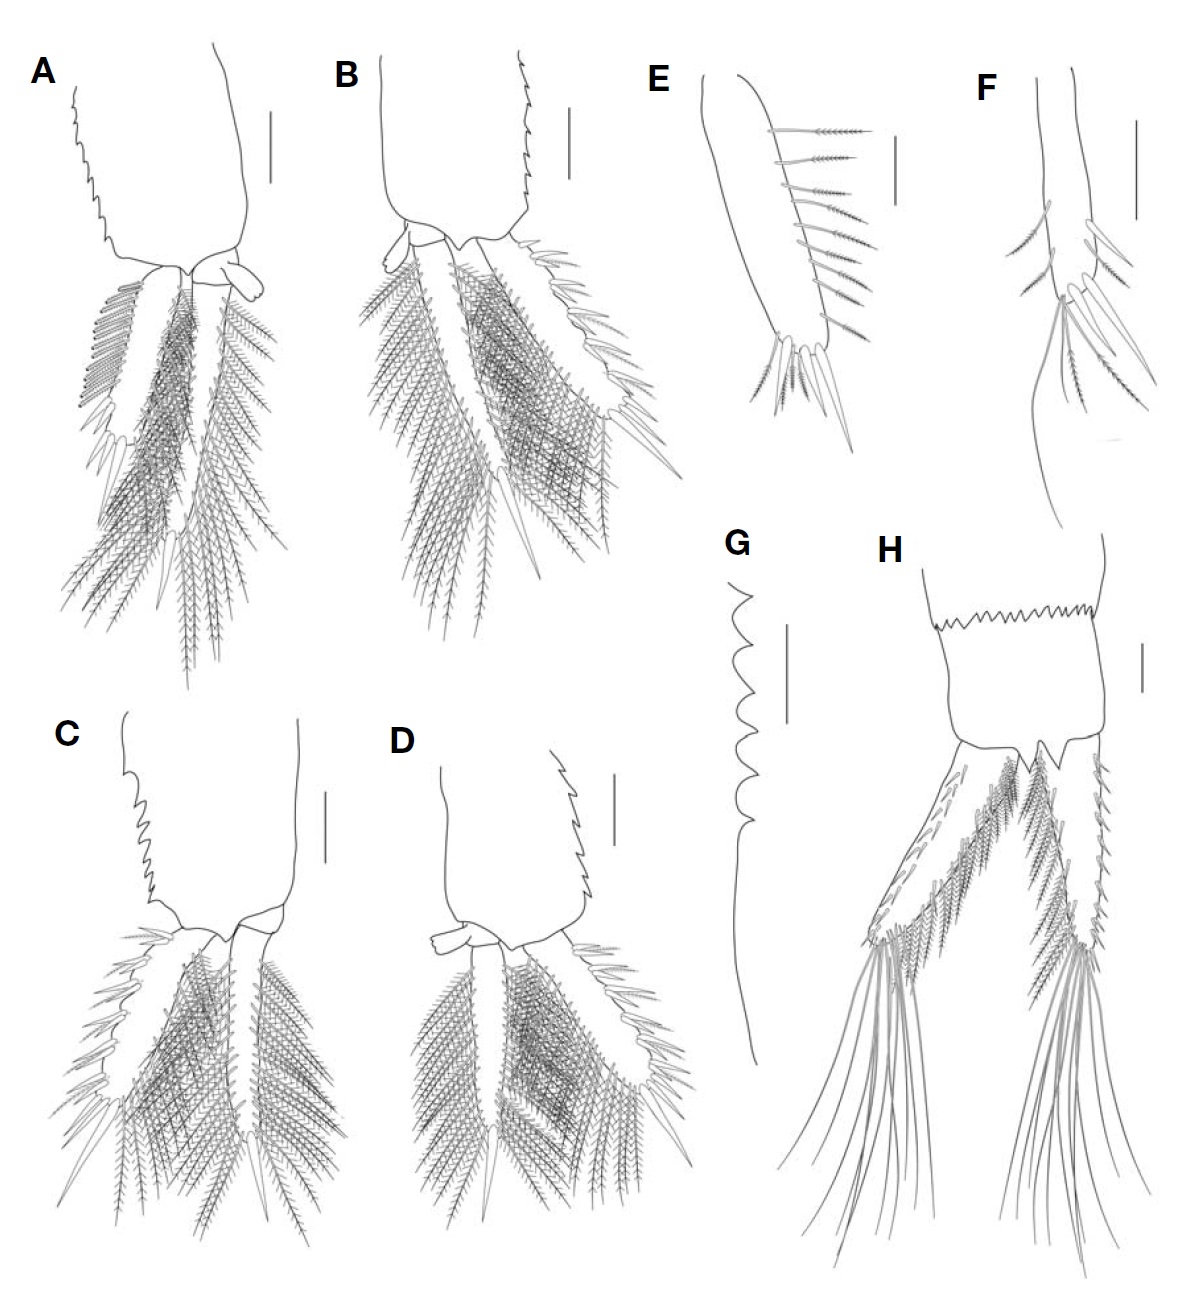 Paranebalia longipes, female. A, Pleopod 1, lateral view (only half of setae of spine row illustrated); B, Pleopod 2, lateral view; C, Pleopod 3, lateral view; D, Pleopod 4, lateral view; E, Pleopod 5; F, Pleopod 6; G, Pleonite 7, posterior lateral border, denticles; H, Uropod, ventral view. Scale bars: A-D, H=0.2 mm, E-G=0.1 mm.